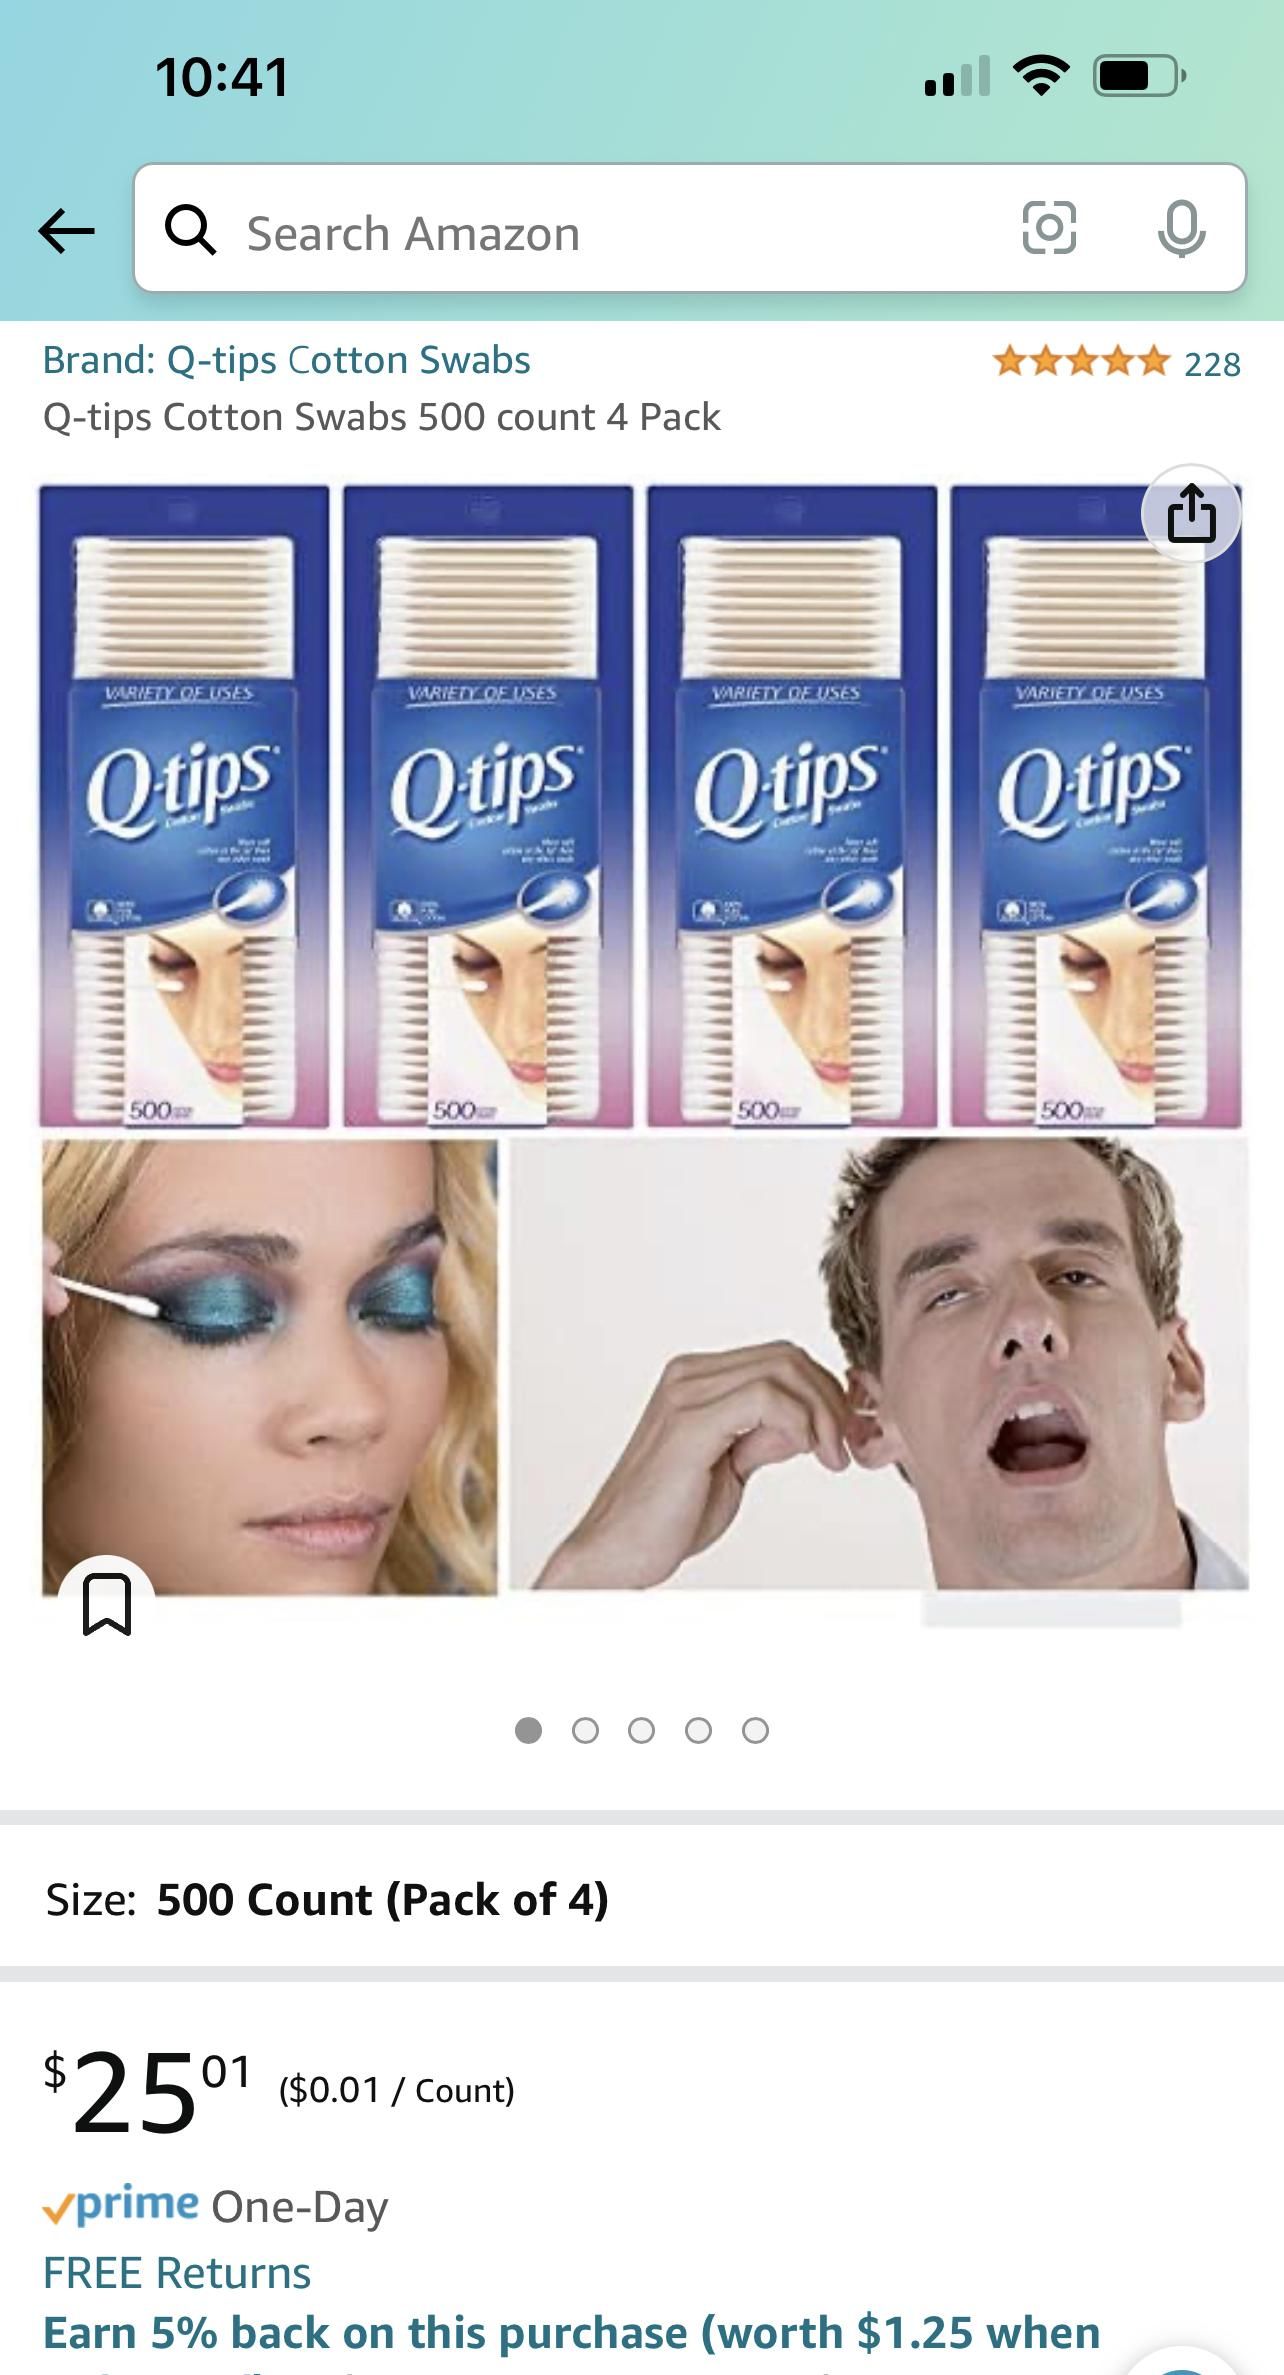 Who approved this product image on Amazon?